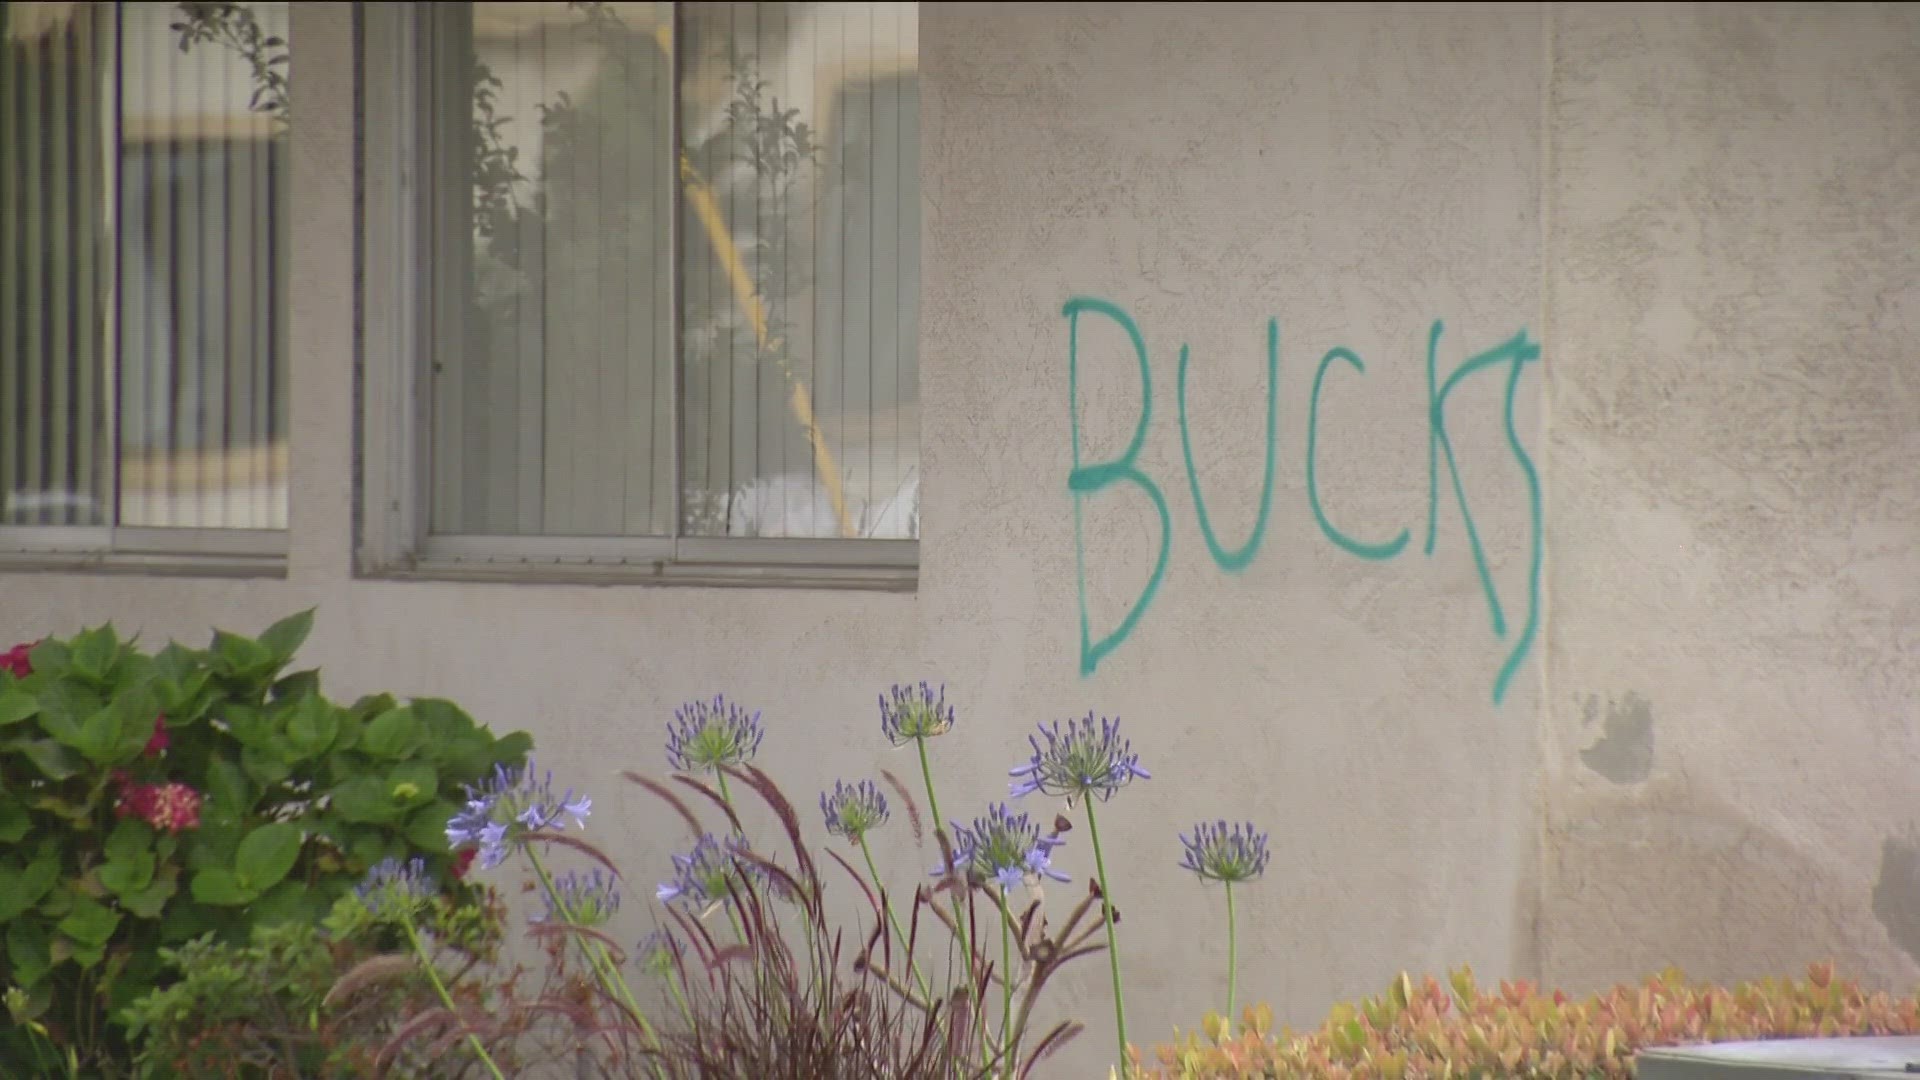 Chula Vista Police Department searching for who is responsible for graffiti and damaging a car windshield.